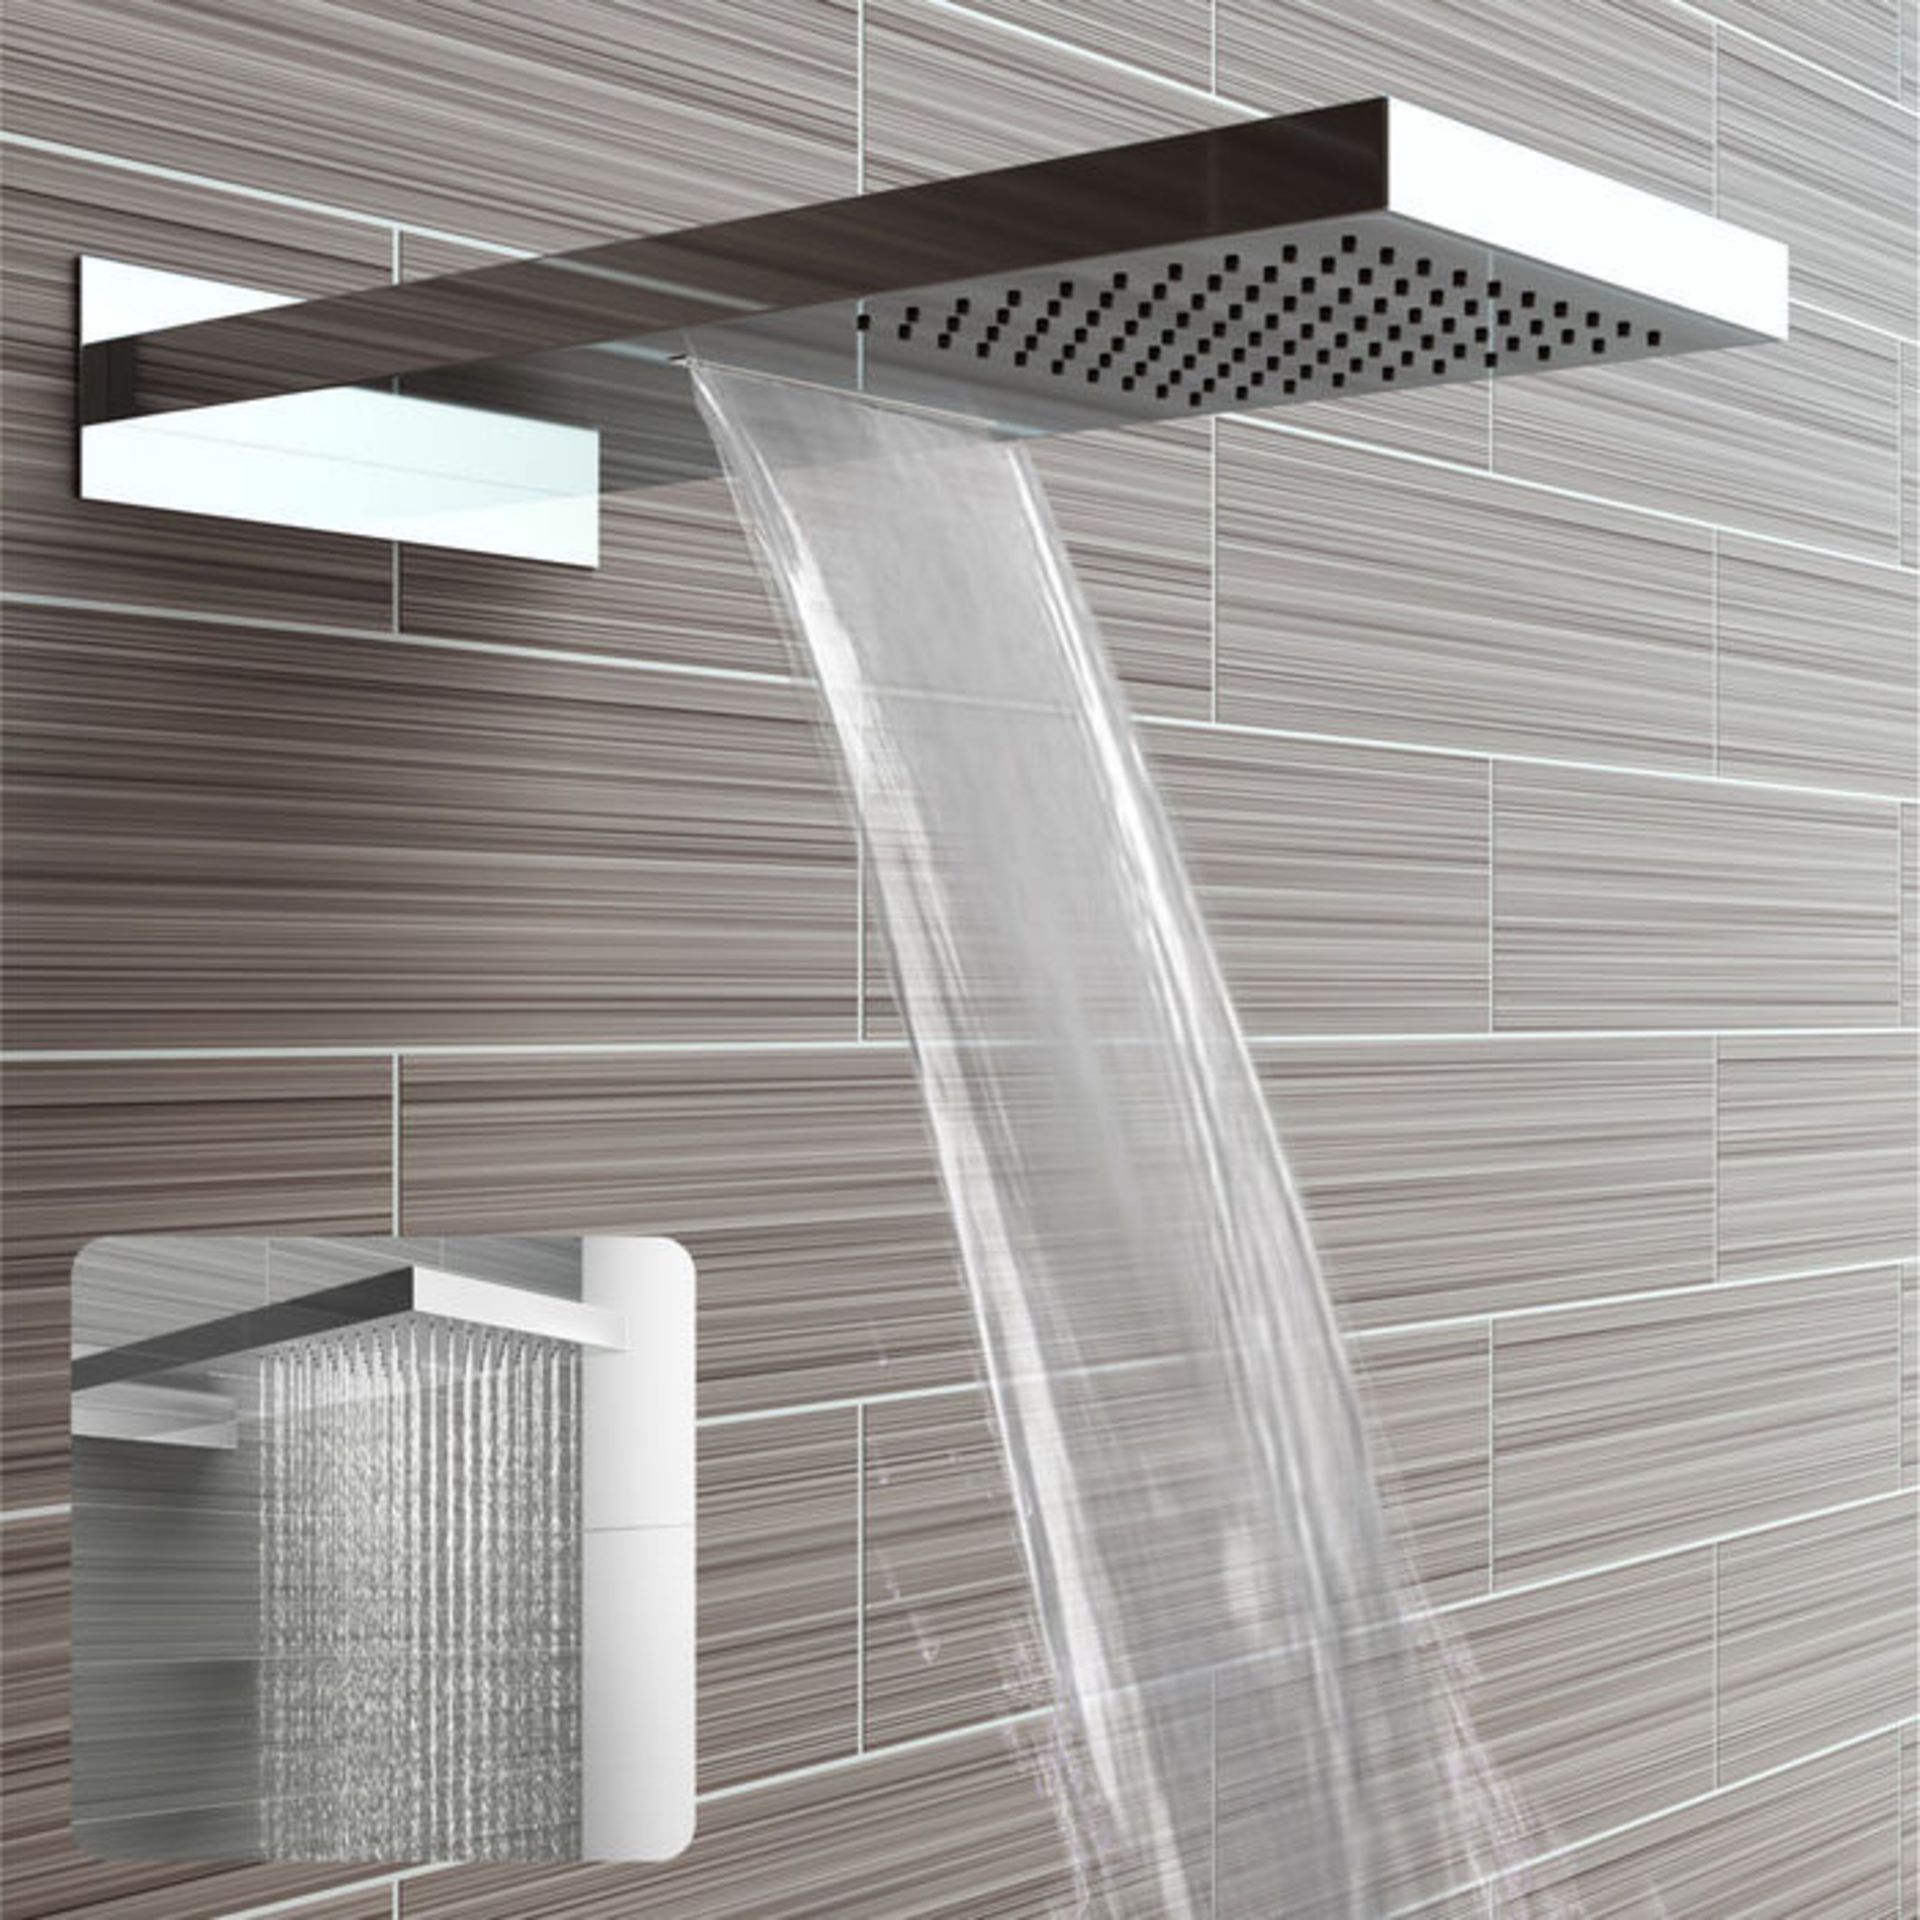 (PP33) 230x500mm Stainless Steel Waterfall Shower Head. RRP £374.98. Dual function waterfall ... - Image 2 of 4